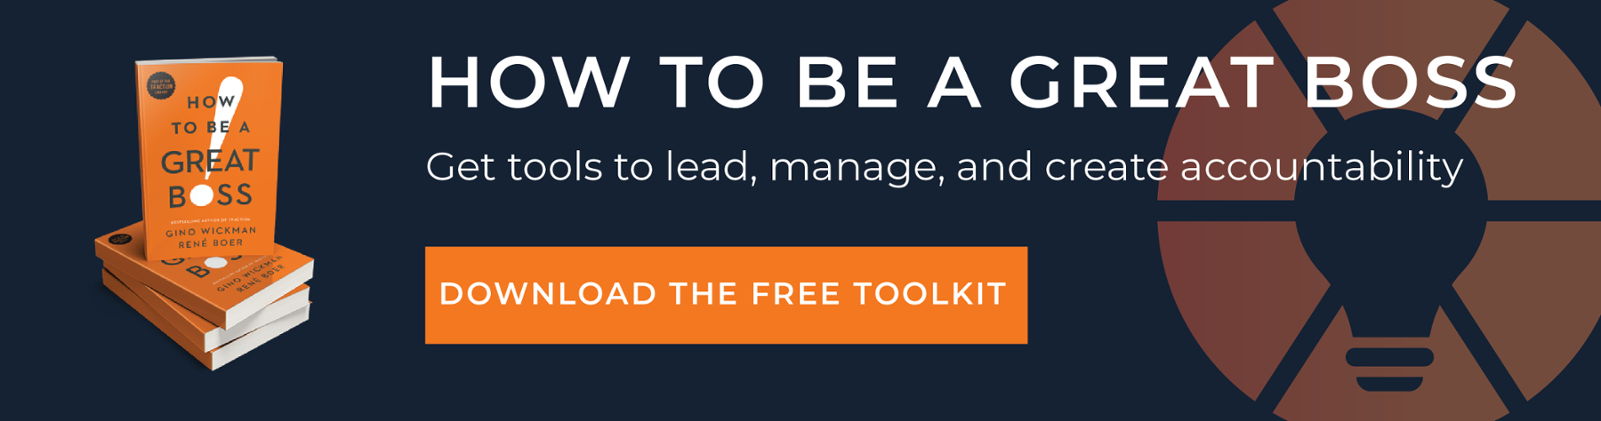 download the how to be a great boss toolkit